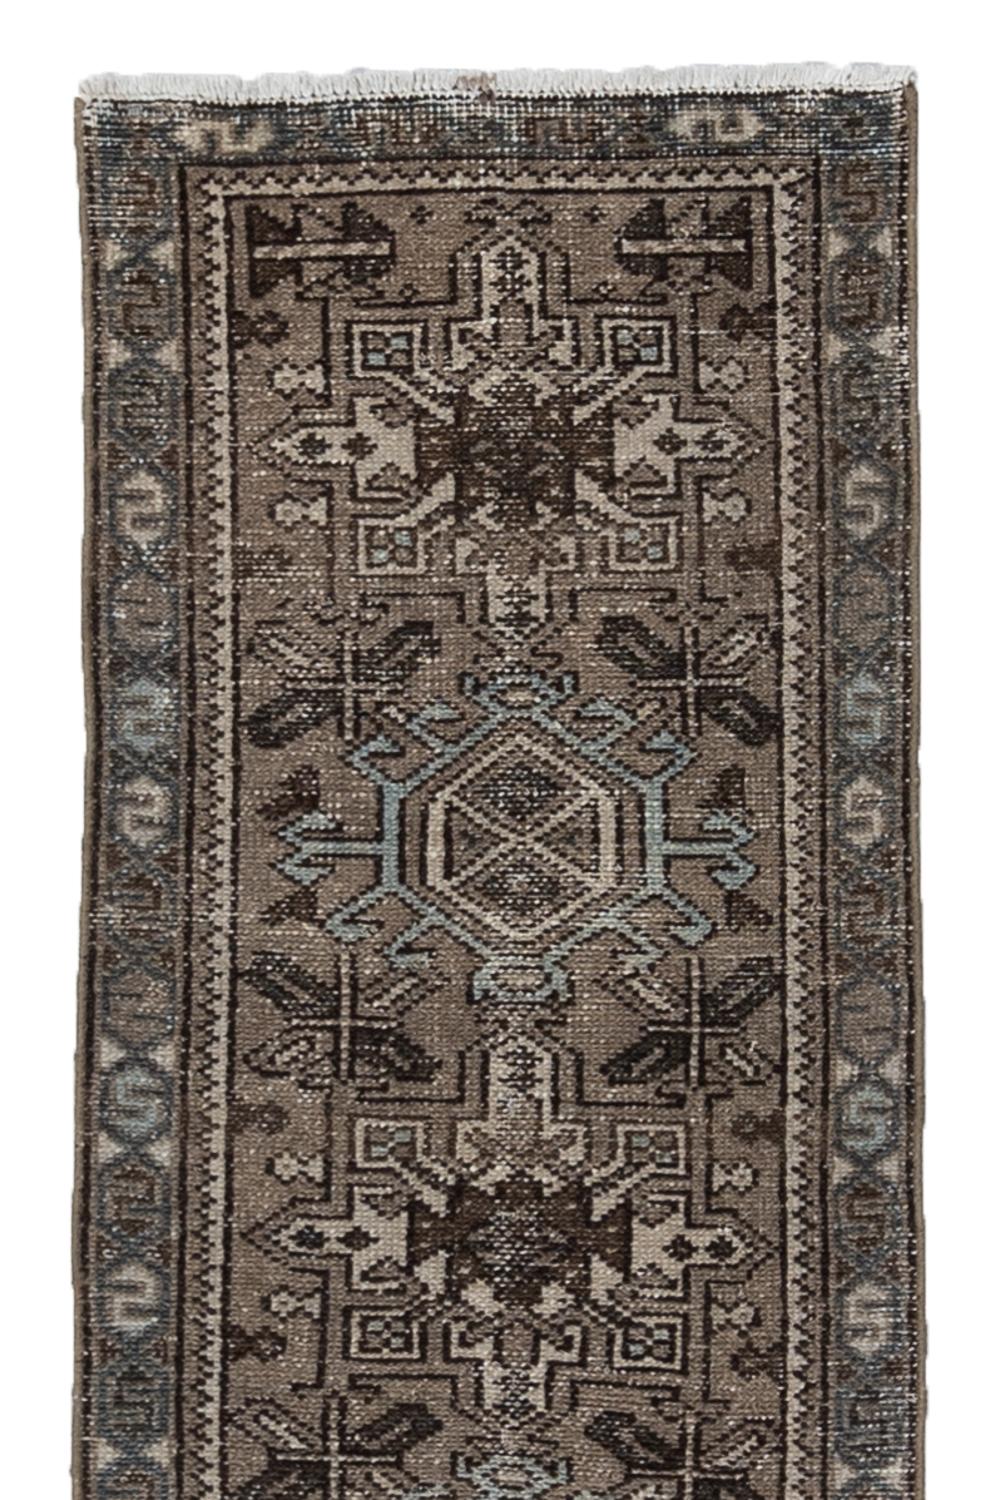 Vintage Persian Karaja Runner Rug In Good Condition For Sale In West Palm Beach, FL